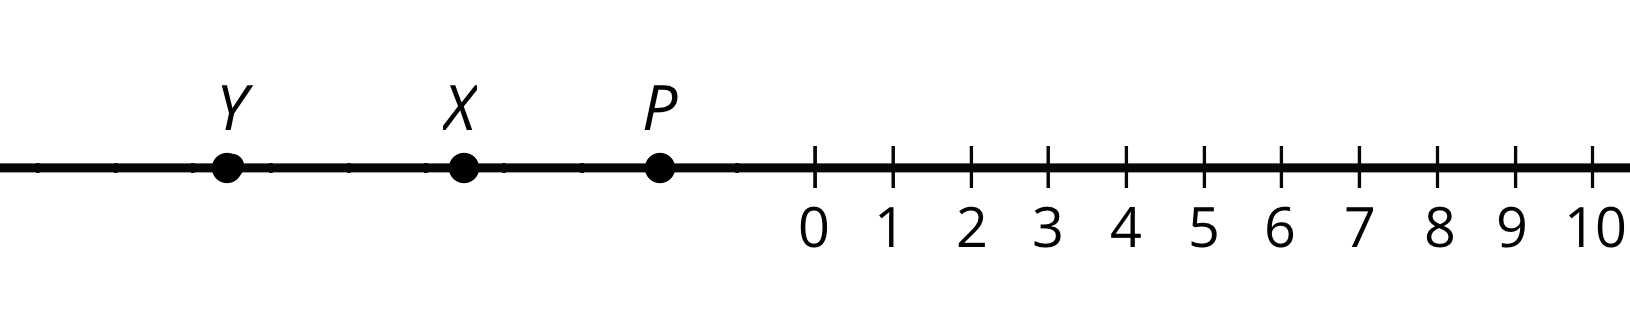 Three points labeled P, X, and Y on a number line. The number 0 is located on the middle of the number line. To the right of 0, the numbers 1 through 10 are indicated on 10 evenly spaced tick marks. To the left of 0, points P, X and Y are plotted. When the number line is folded at 0, point P aligns with 2, point X is halfway between 4 and 5, and point Y is halfway between 7 and 8.